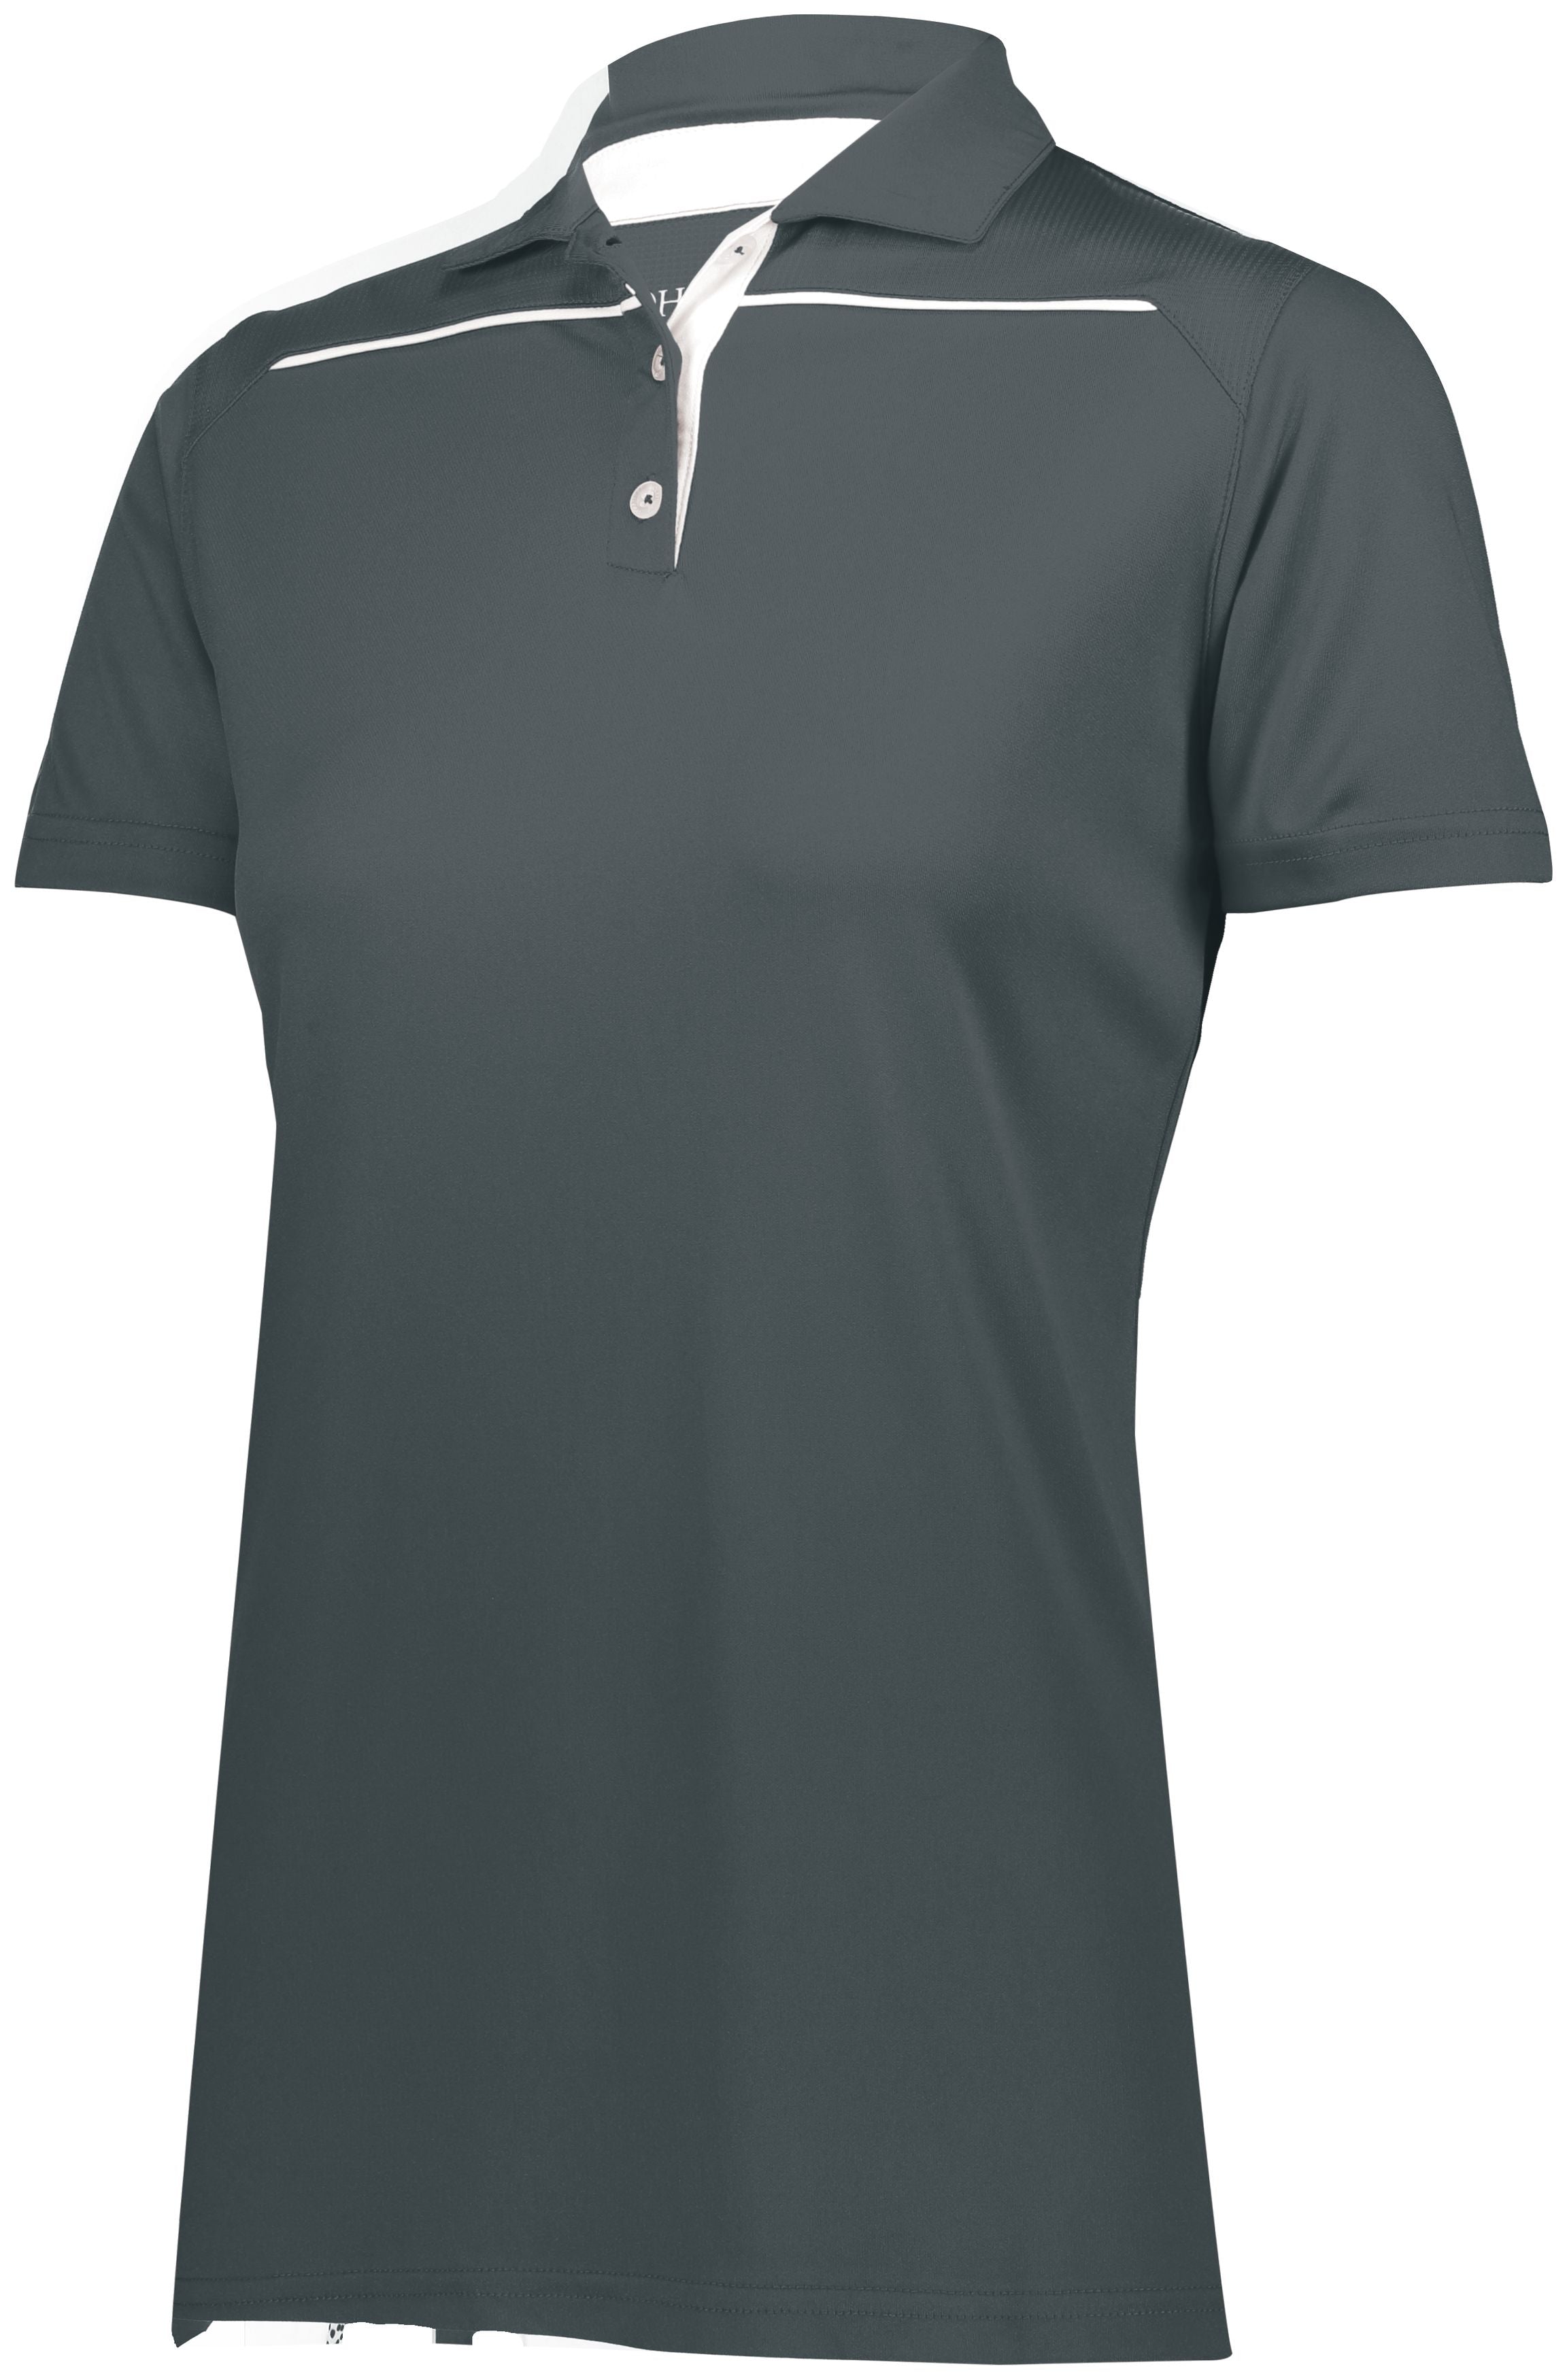 Holloway Ladies Defer Polo in Graphite/White  -Part of the Ladies, Ladies-Polo, Polos, Holloway, Shirts product lines at KanaleyCreations.com